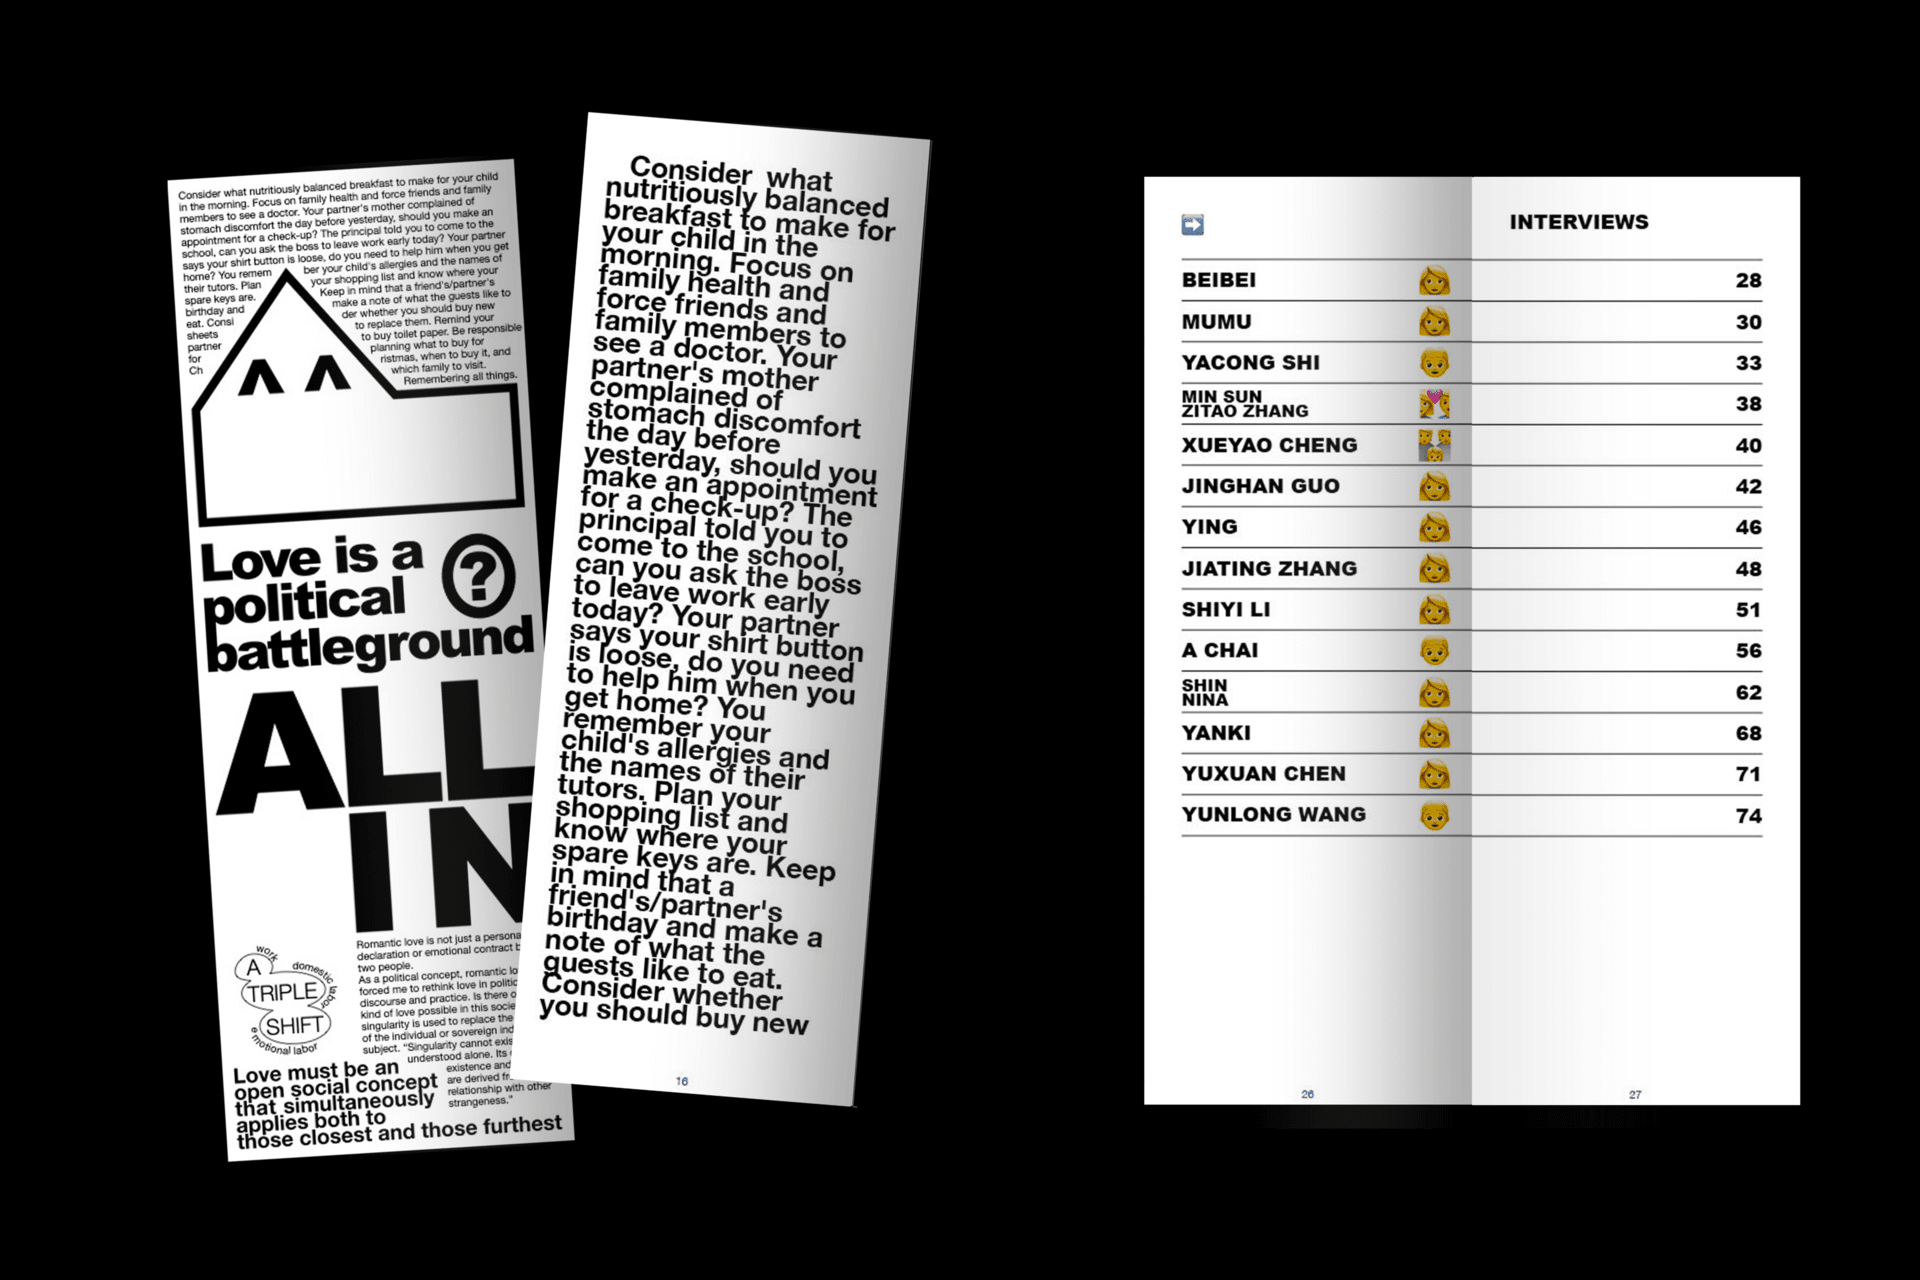 Image of three rectangular white pages of black text, against a black background. Two on the left are of the same size, and the one on the right is wider, and appears to be a folded index page.